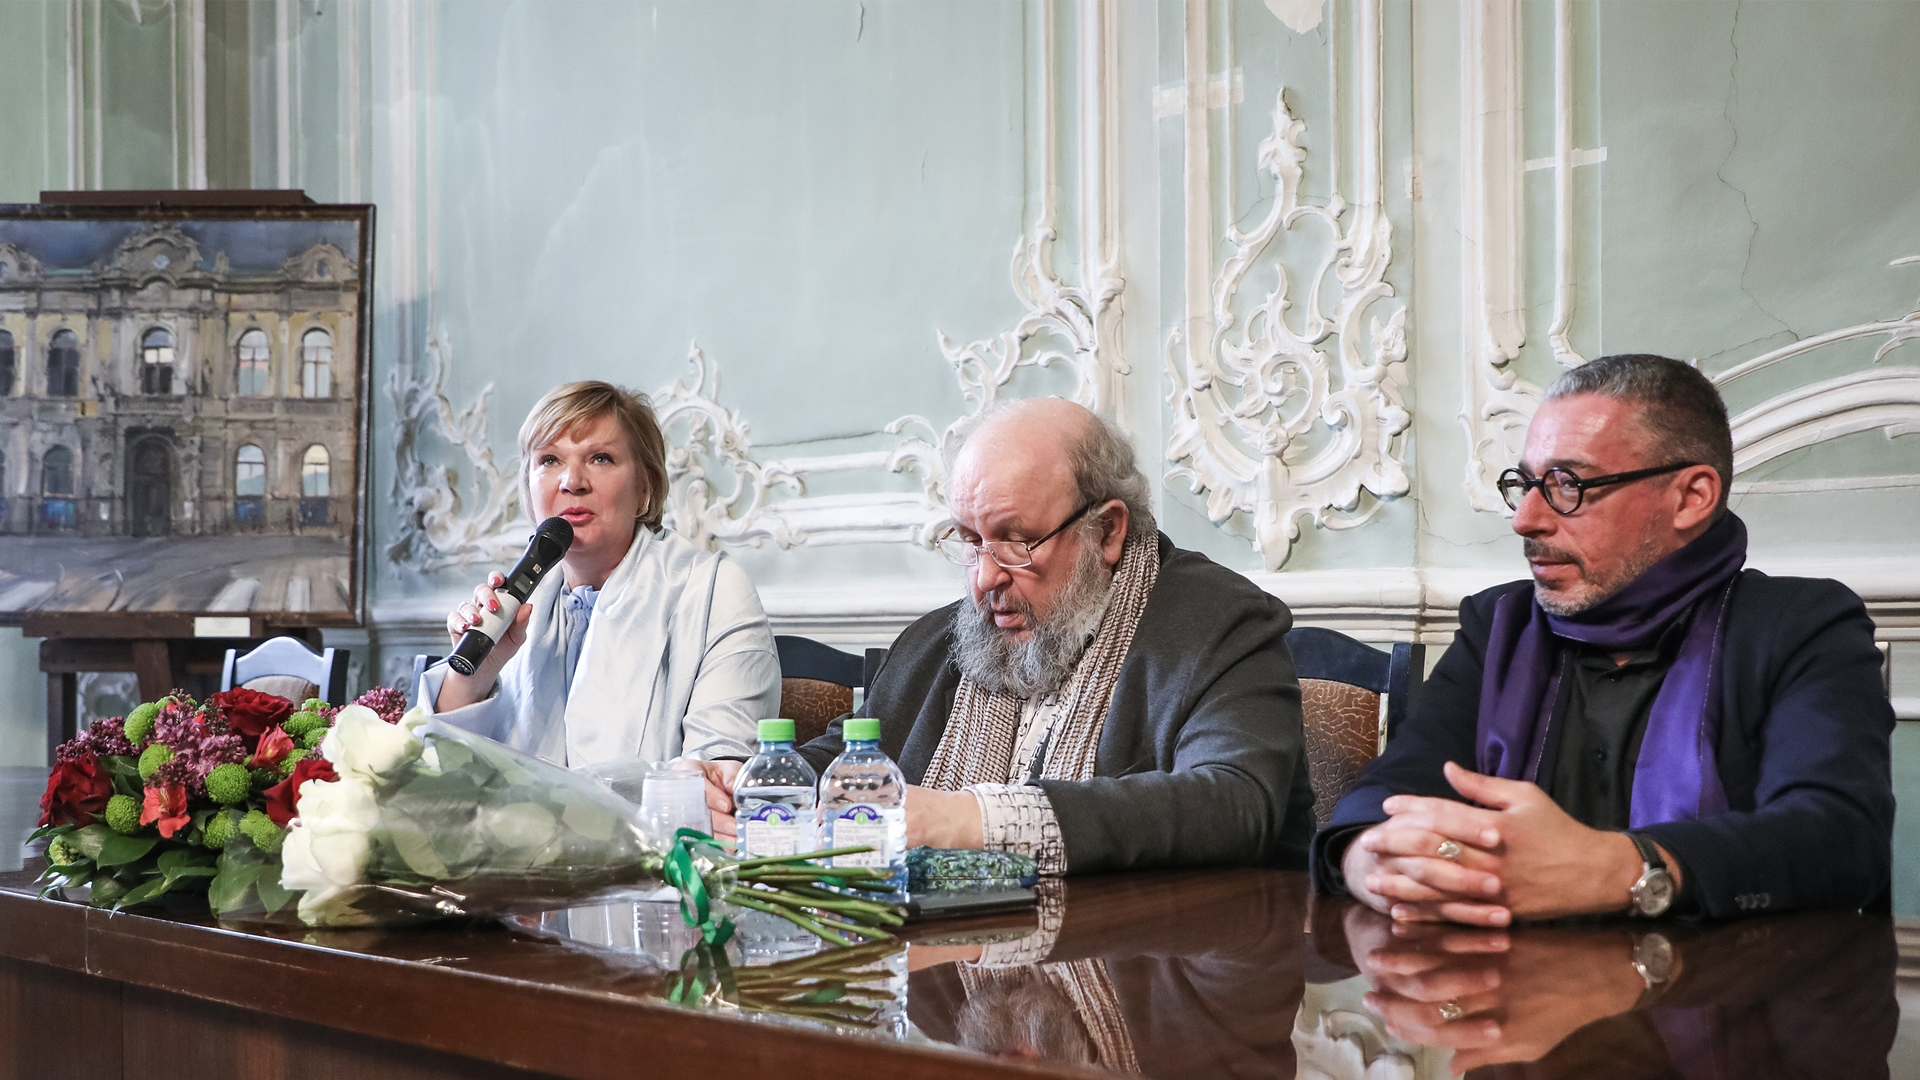 The guests of the discussion were welcomed by Yuri Mudrov, Director of the Isaac's Cathedral State Museum, Natalia Sidorkevich, Chairman of the Board of the World Club of St Petersburgers, and Pavel Chernyakov, Chairman of the Organising Committee of the Golden Trezzini Award